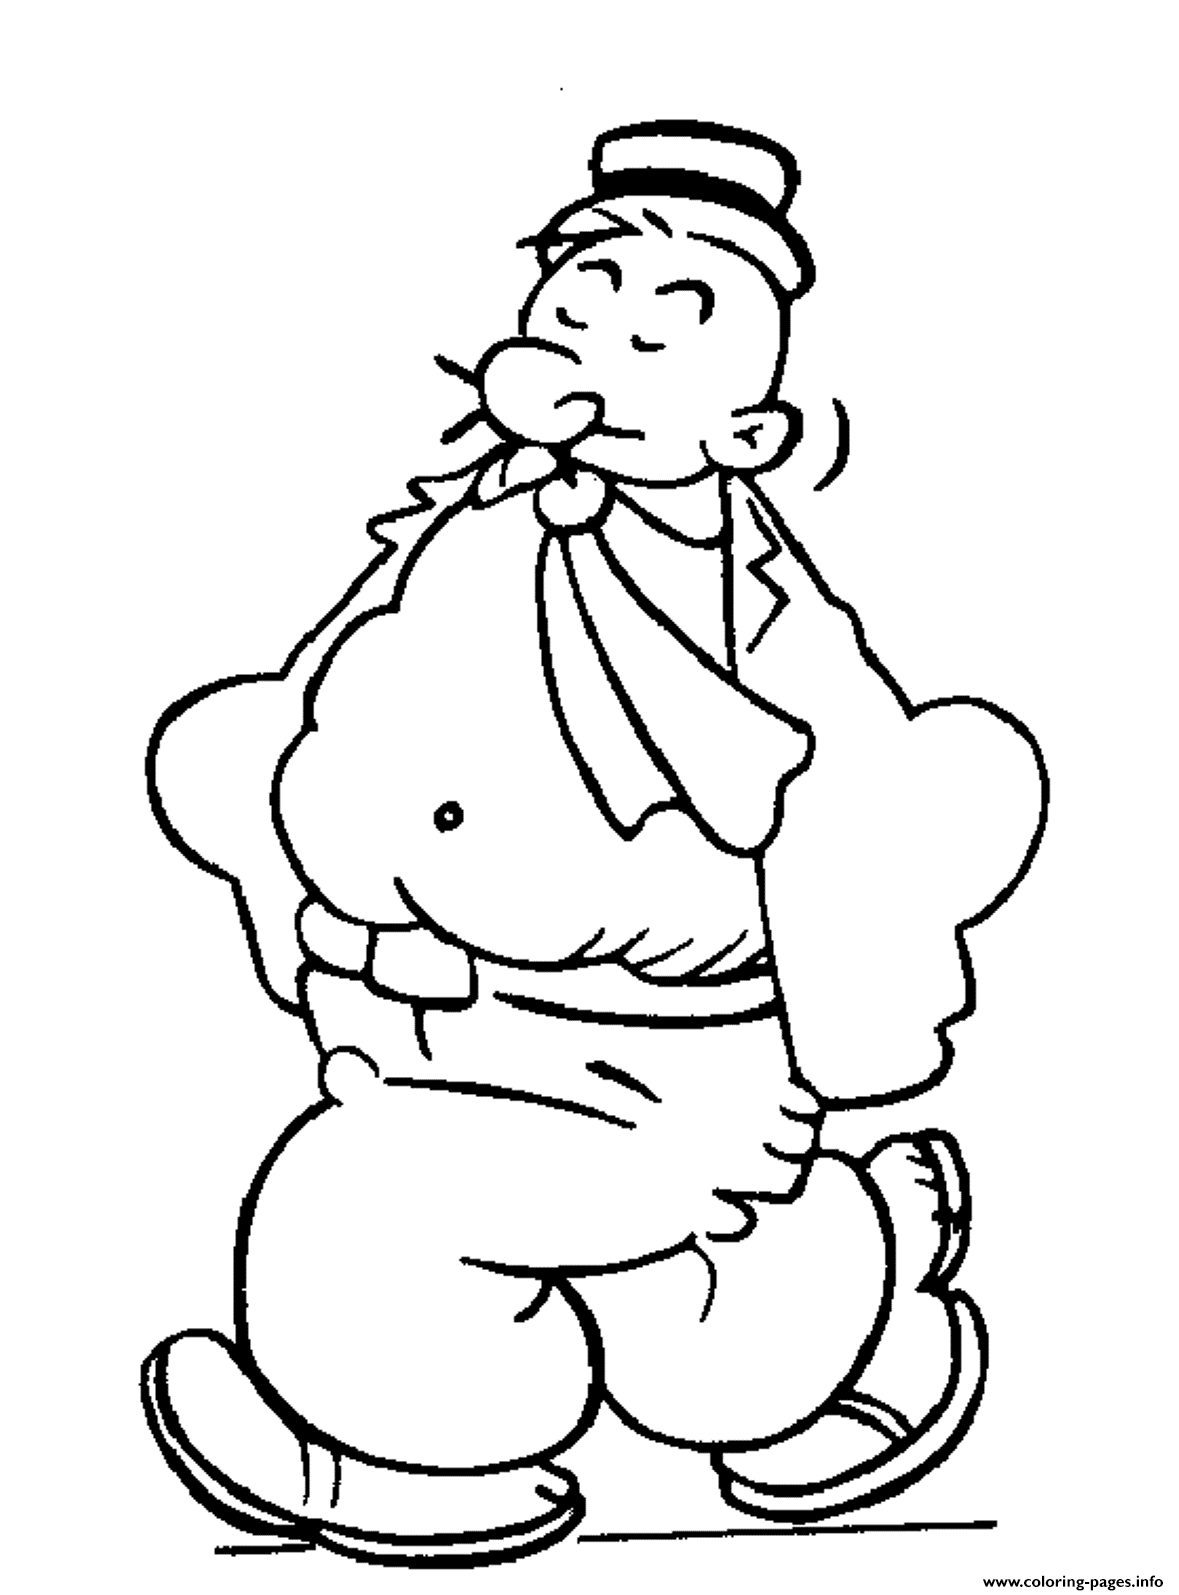 Wimpy Of Popeye S4975 Coloring page Printable